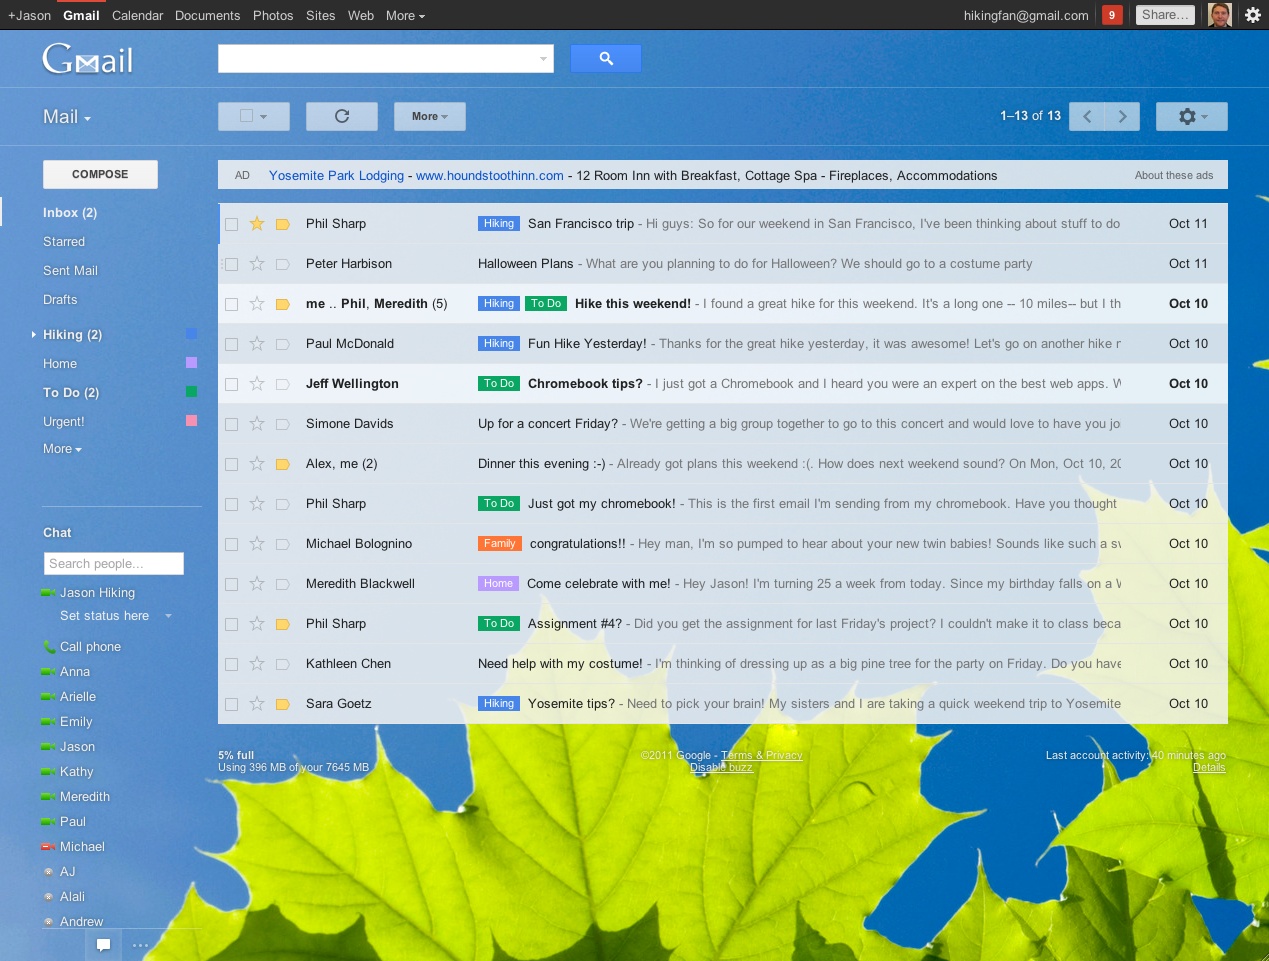 gmail themes change with time